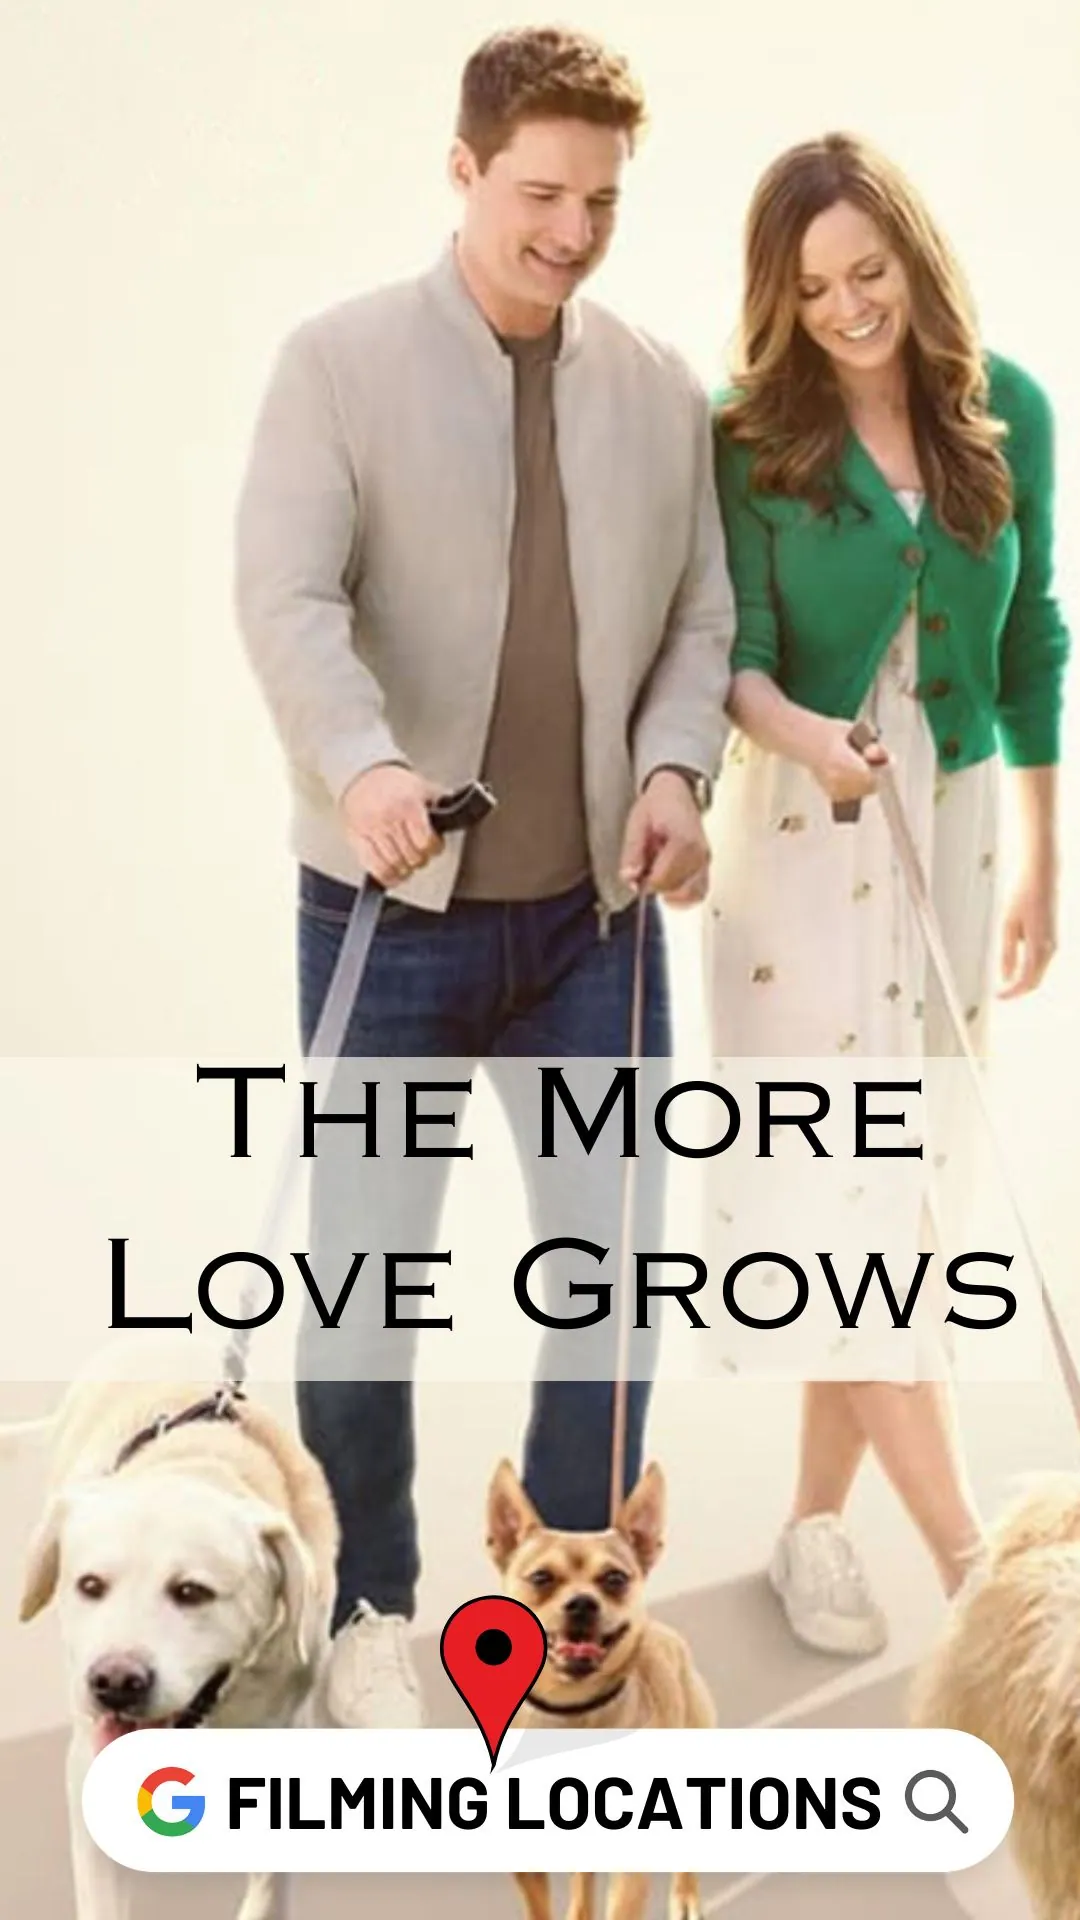 The More Love Grows Filming Location